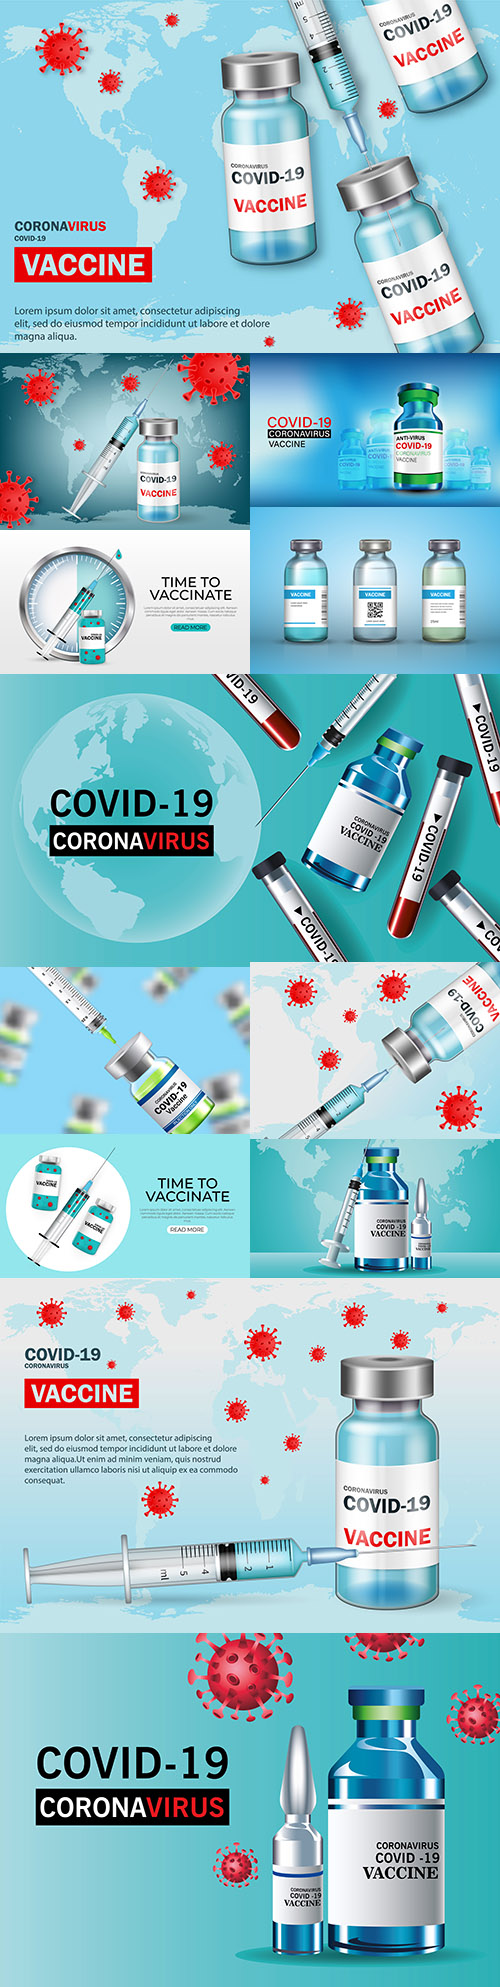 Vaccination against covid-19 vaccine bottle and injection tools 3d realisti